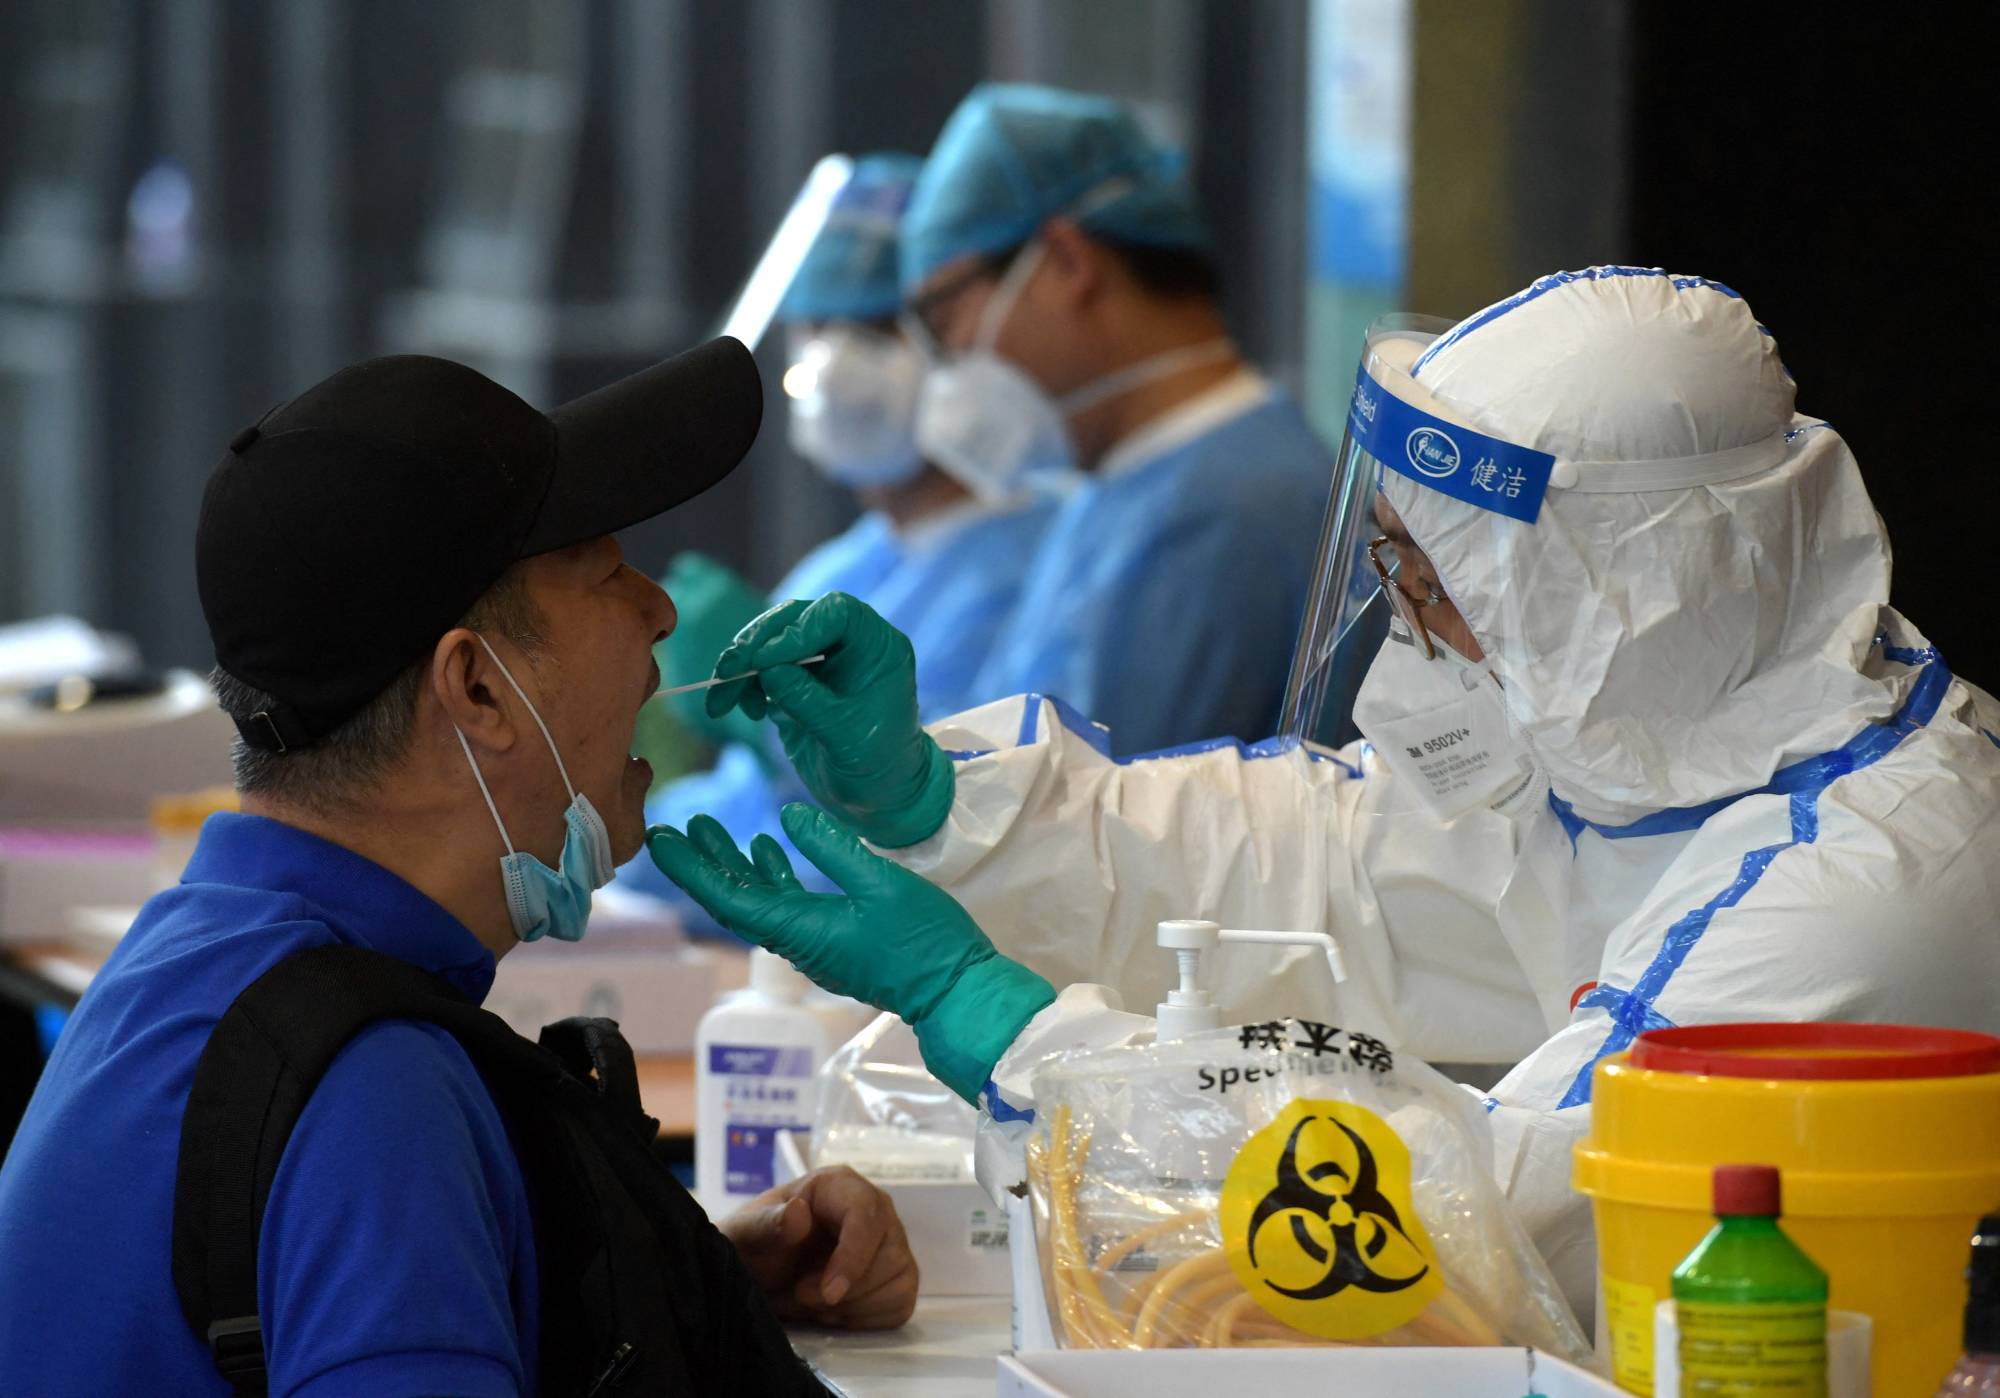 A medical staff in protective suit collects swabs from people who have recently traveled to Beijing for nucleic acid tests, in Nanjing, China, in 2020. | CHINA DAILY / VIA REUTERS 